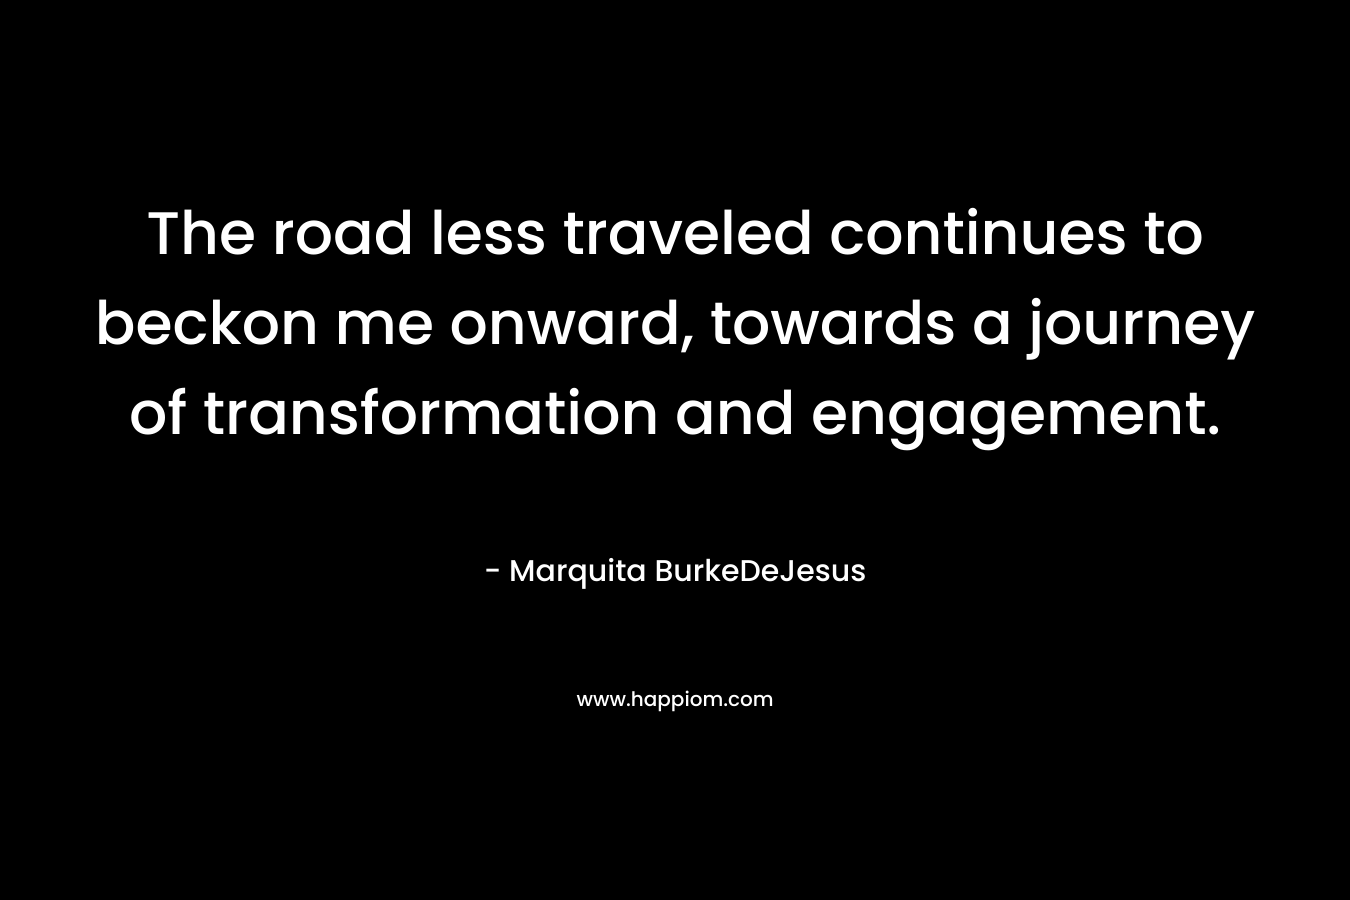 The road less traveled continues to beckon me onward, towards a journey of transformation and engagement. – Marquita BurkeDeJesus